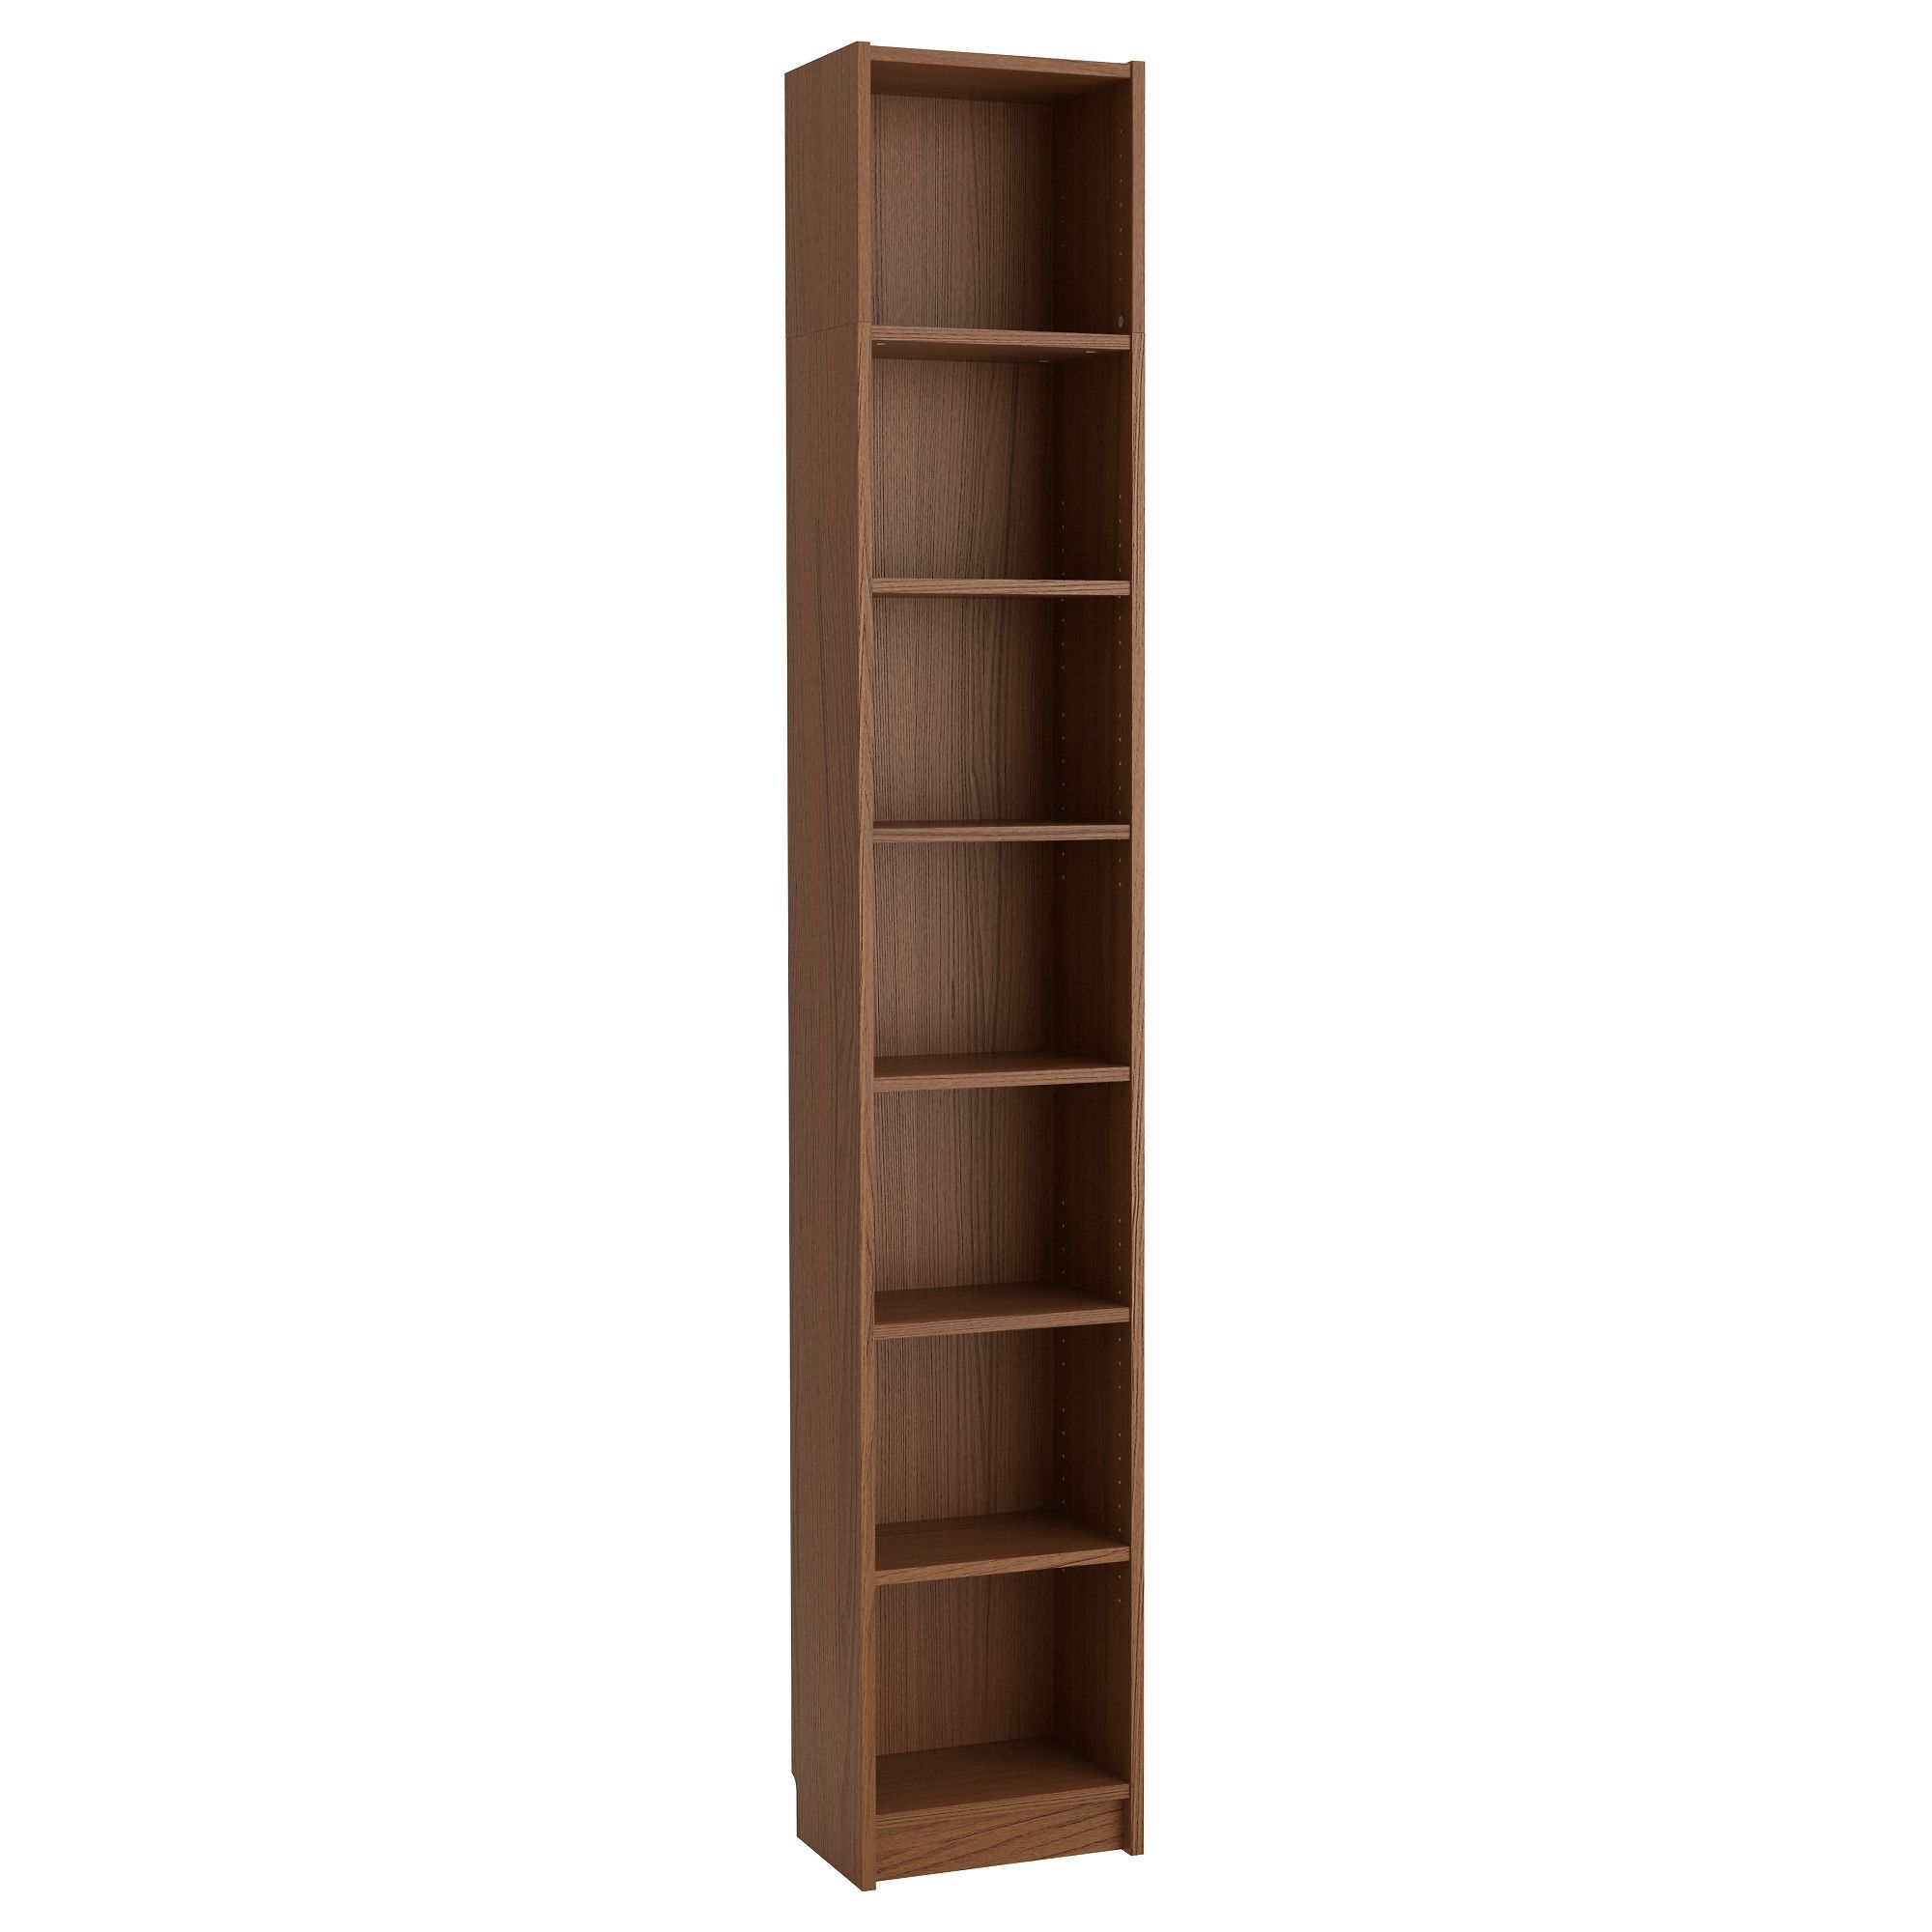 Very Narrow Shelving Unit Pertaining To Preferred Bookcases (View 3 of 15)